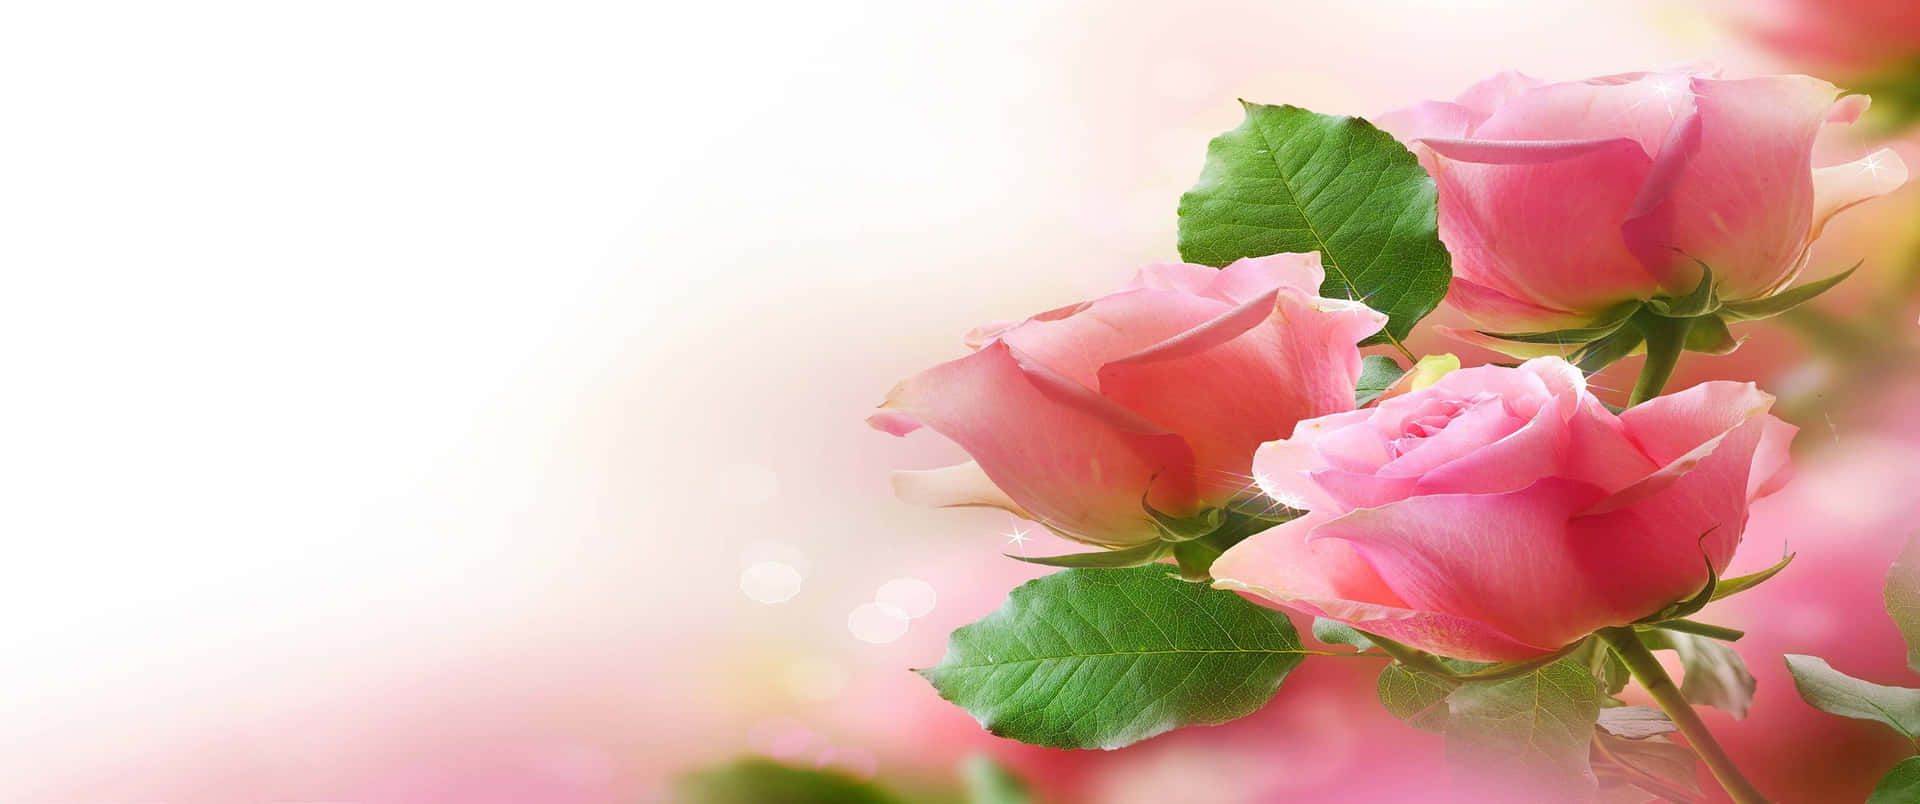 Beautiful Roses in stunning 3440x1440p Resolution